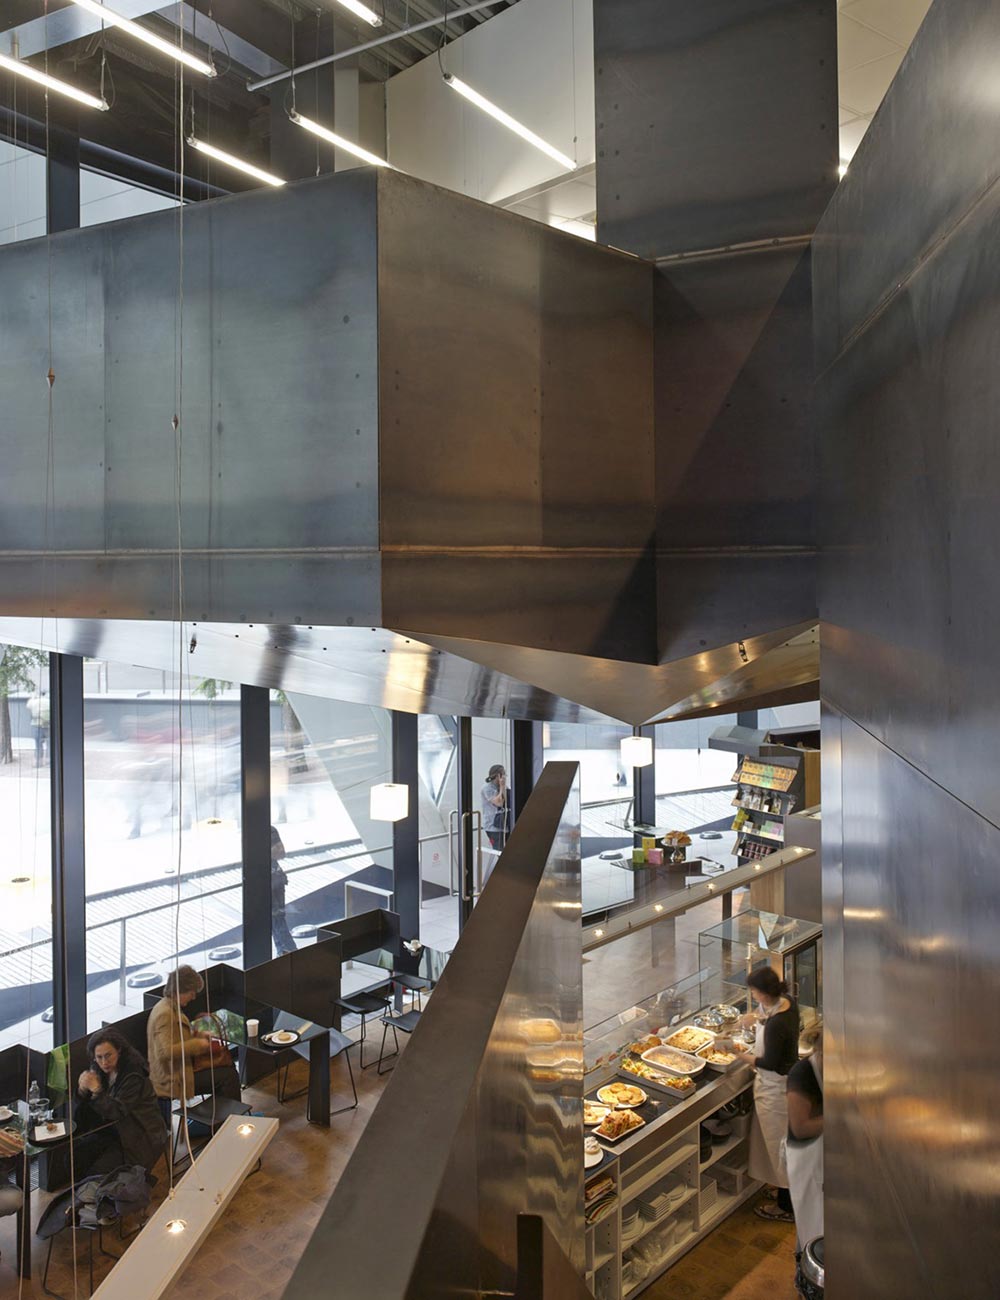 A shop, café and specialist kitchen are accommodated within the double-height ground floor space behind the entrance to 30 St Mary Axe. A new commercial kitchen level is suspended from the ceiling creating a striking, sculpted steel ceiling to the café level below. Both the mezzanine and stair are fabricated from 3mm steel panels. Steel is also used for furniture, while warmth is added by an end-grain oak floor and distinctive glass panels, back painted in a rich purple hue that allows the seamless integration of the client’s established brand. We provided all mechanical and electrical services.